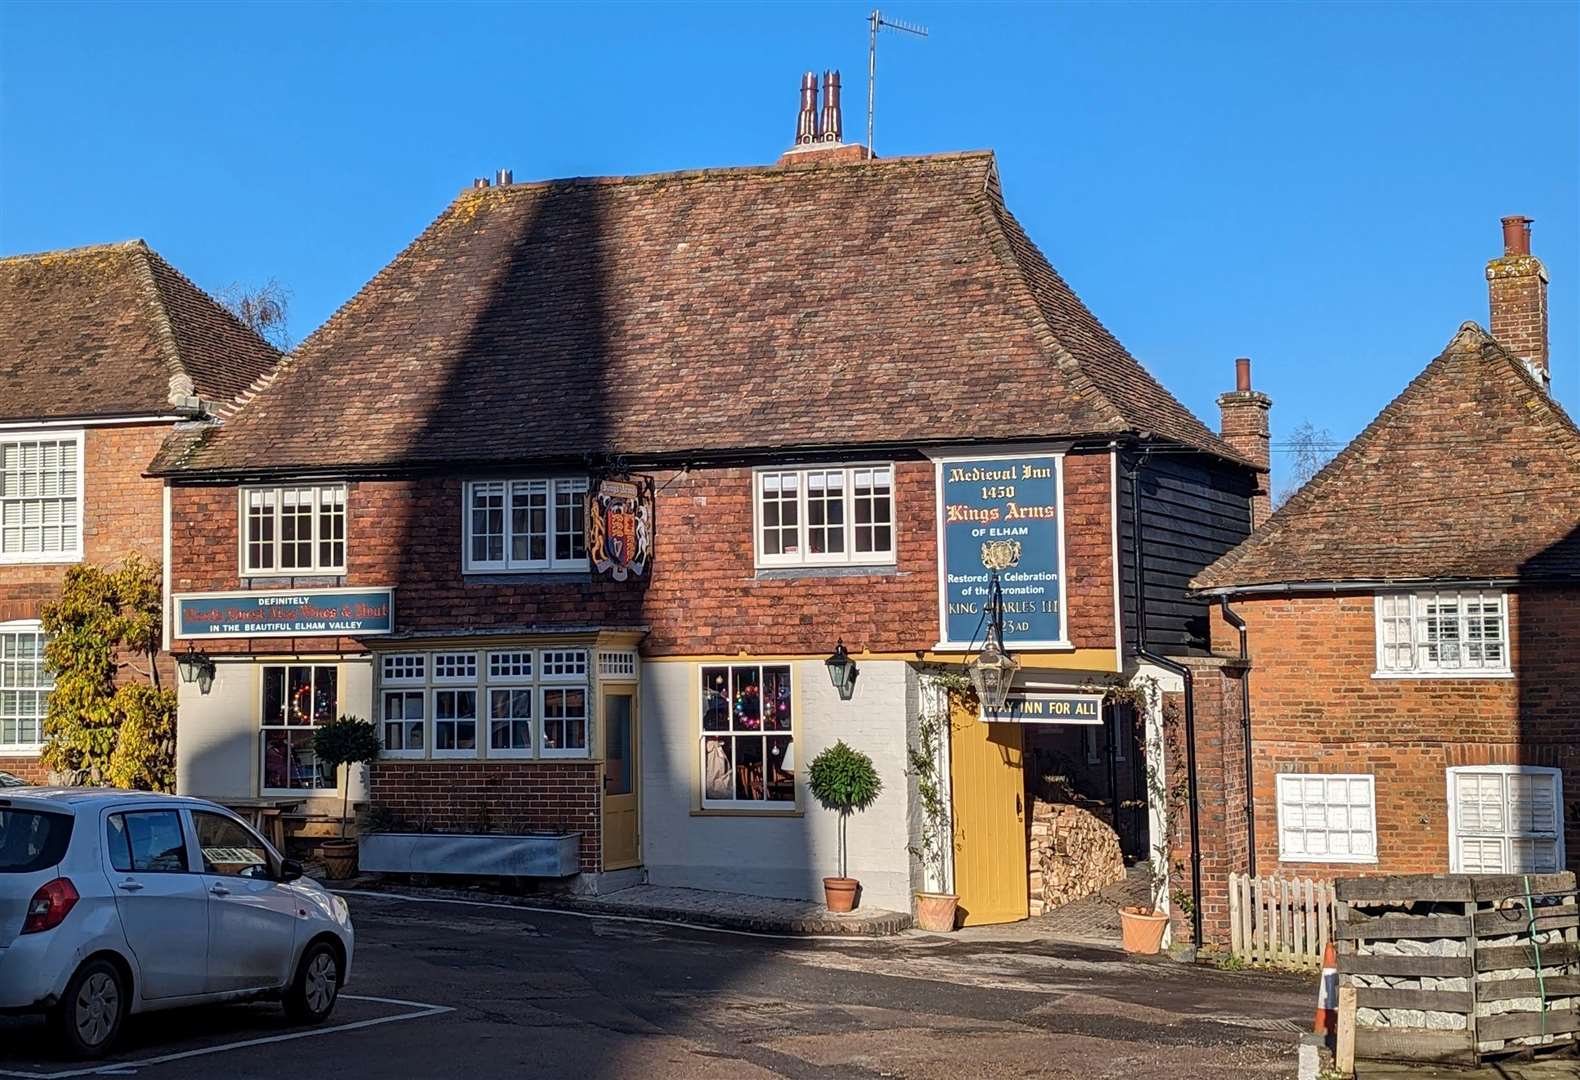 Reporter Rhys Griffiths walks from Newington to Elham via Lyminge, along part of the route of the former Elham Valley railway line. Pictured is the Kings Arms in Elham